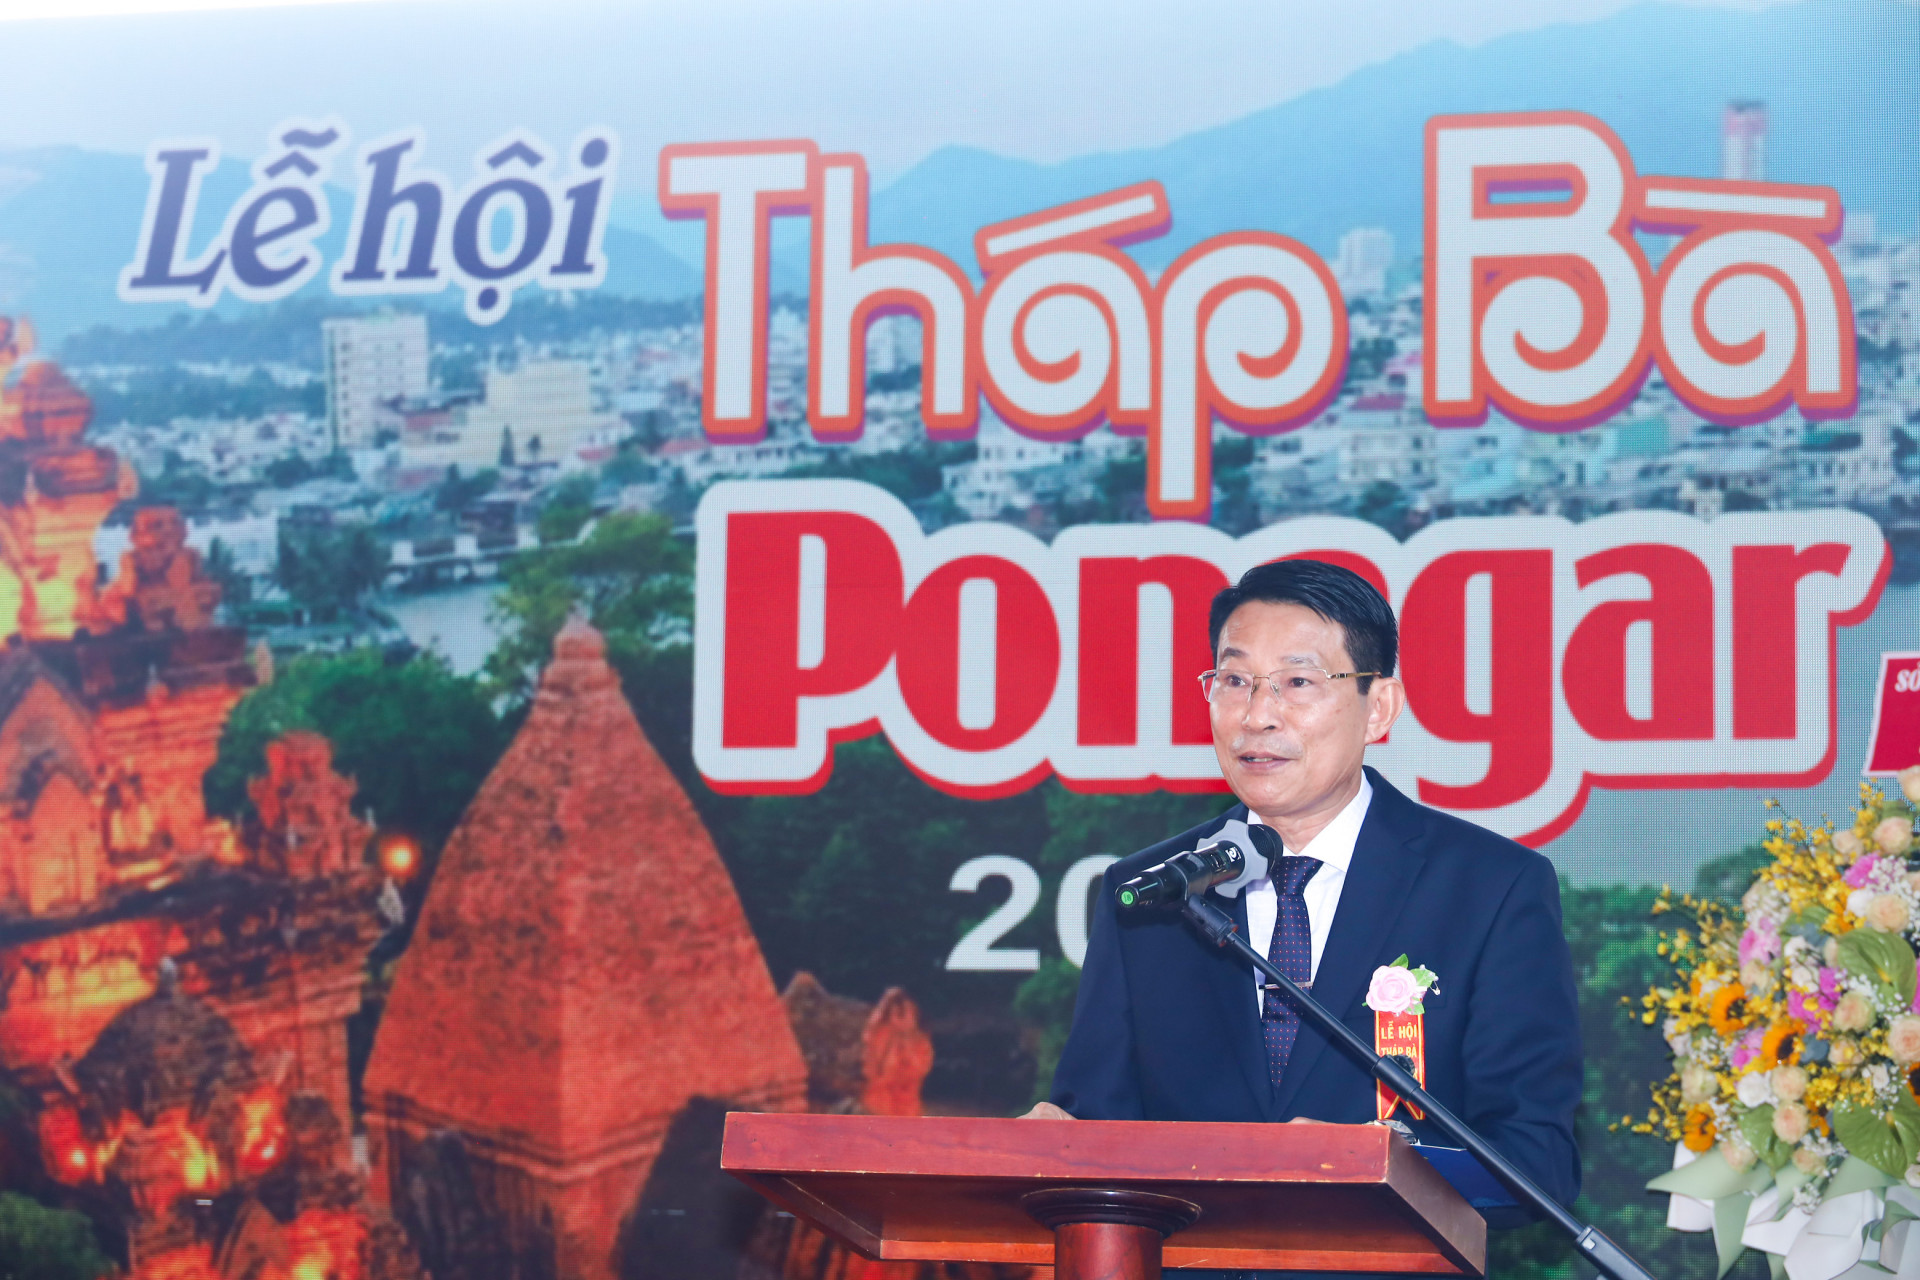 Dinh Van Thieu speaking at the opening ceremony 

